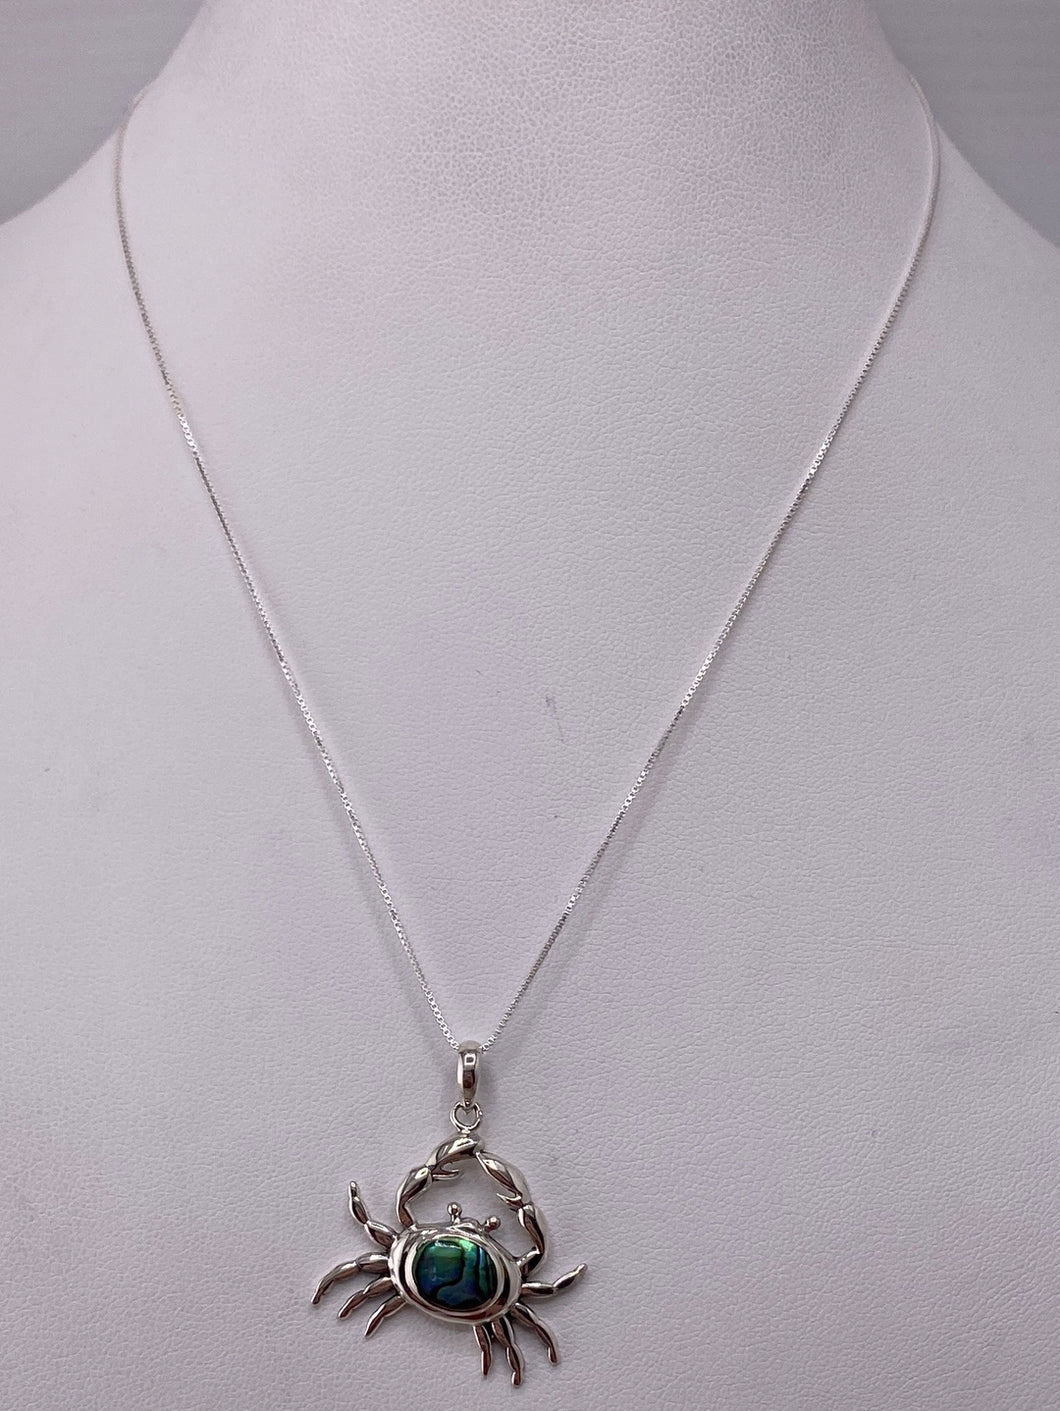 S.S. Abalone Crab Necklaces